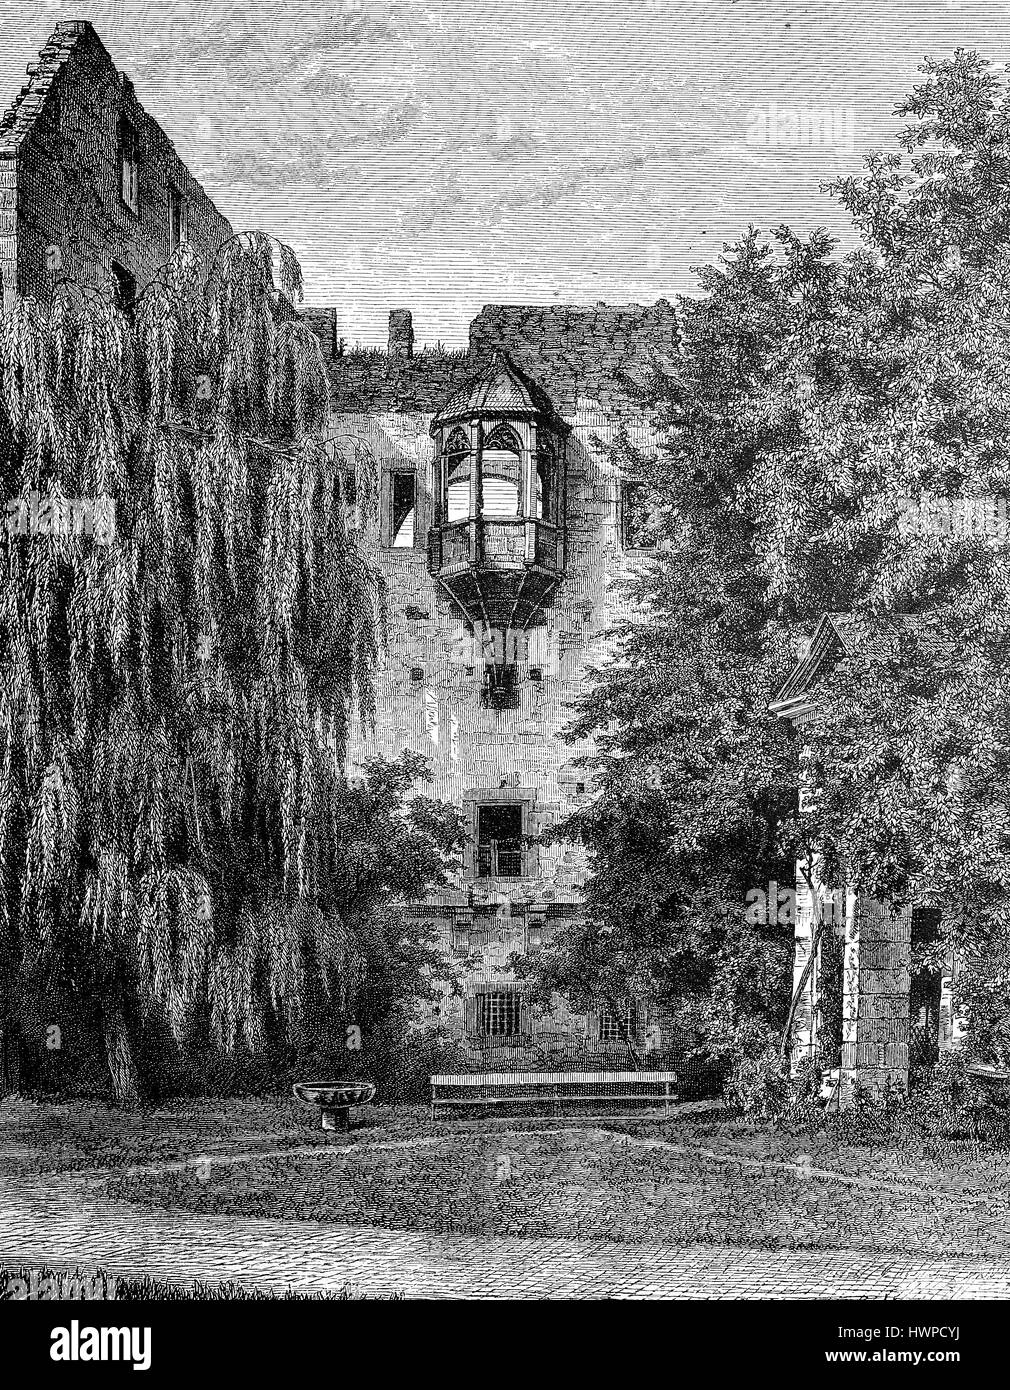 The Ruprecht building of the castle of Heidelberg, Germany, Reproduction of an original woodcut from the year 1882, digital improved Stock Photo